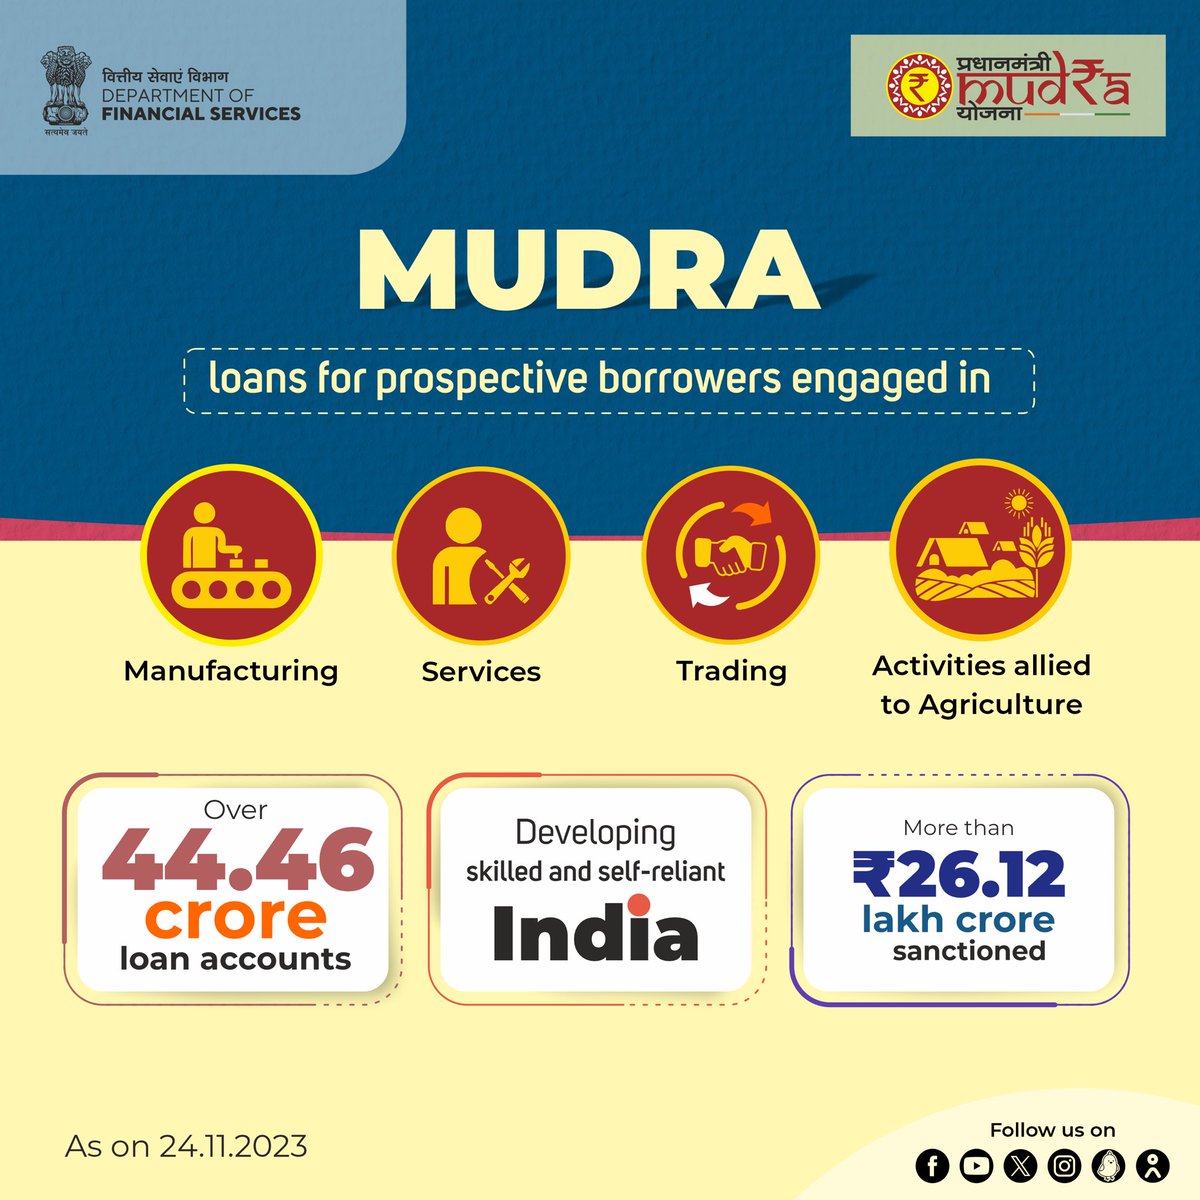 Pradhan Mantri Mudra Yojana #PMMY is helping aspiring #entrepreneurs to flourish and thrive with more than 44 crore loan accounts opened and more than ₹26.12 lakh crore sanctioned amount as on 24.11.2023.

#MUDRAYojana 
#FinancialInclusion 
#ViksitBharat 
#FinMinReview2023